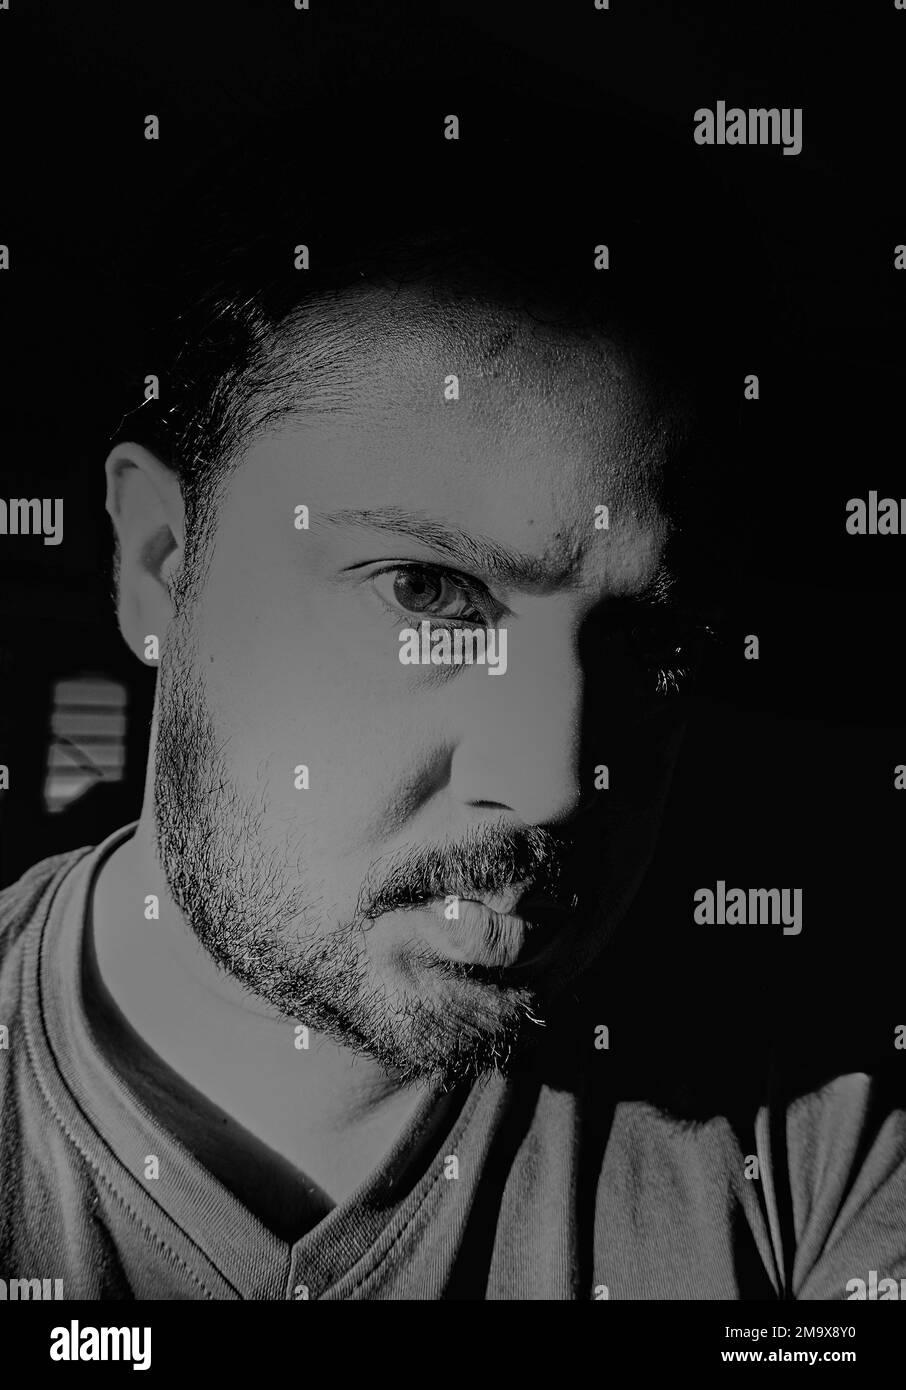 Raiganj, West Bengal, India,29-03-2020.black and white face of human face with beard Stock Photo